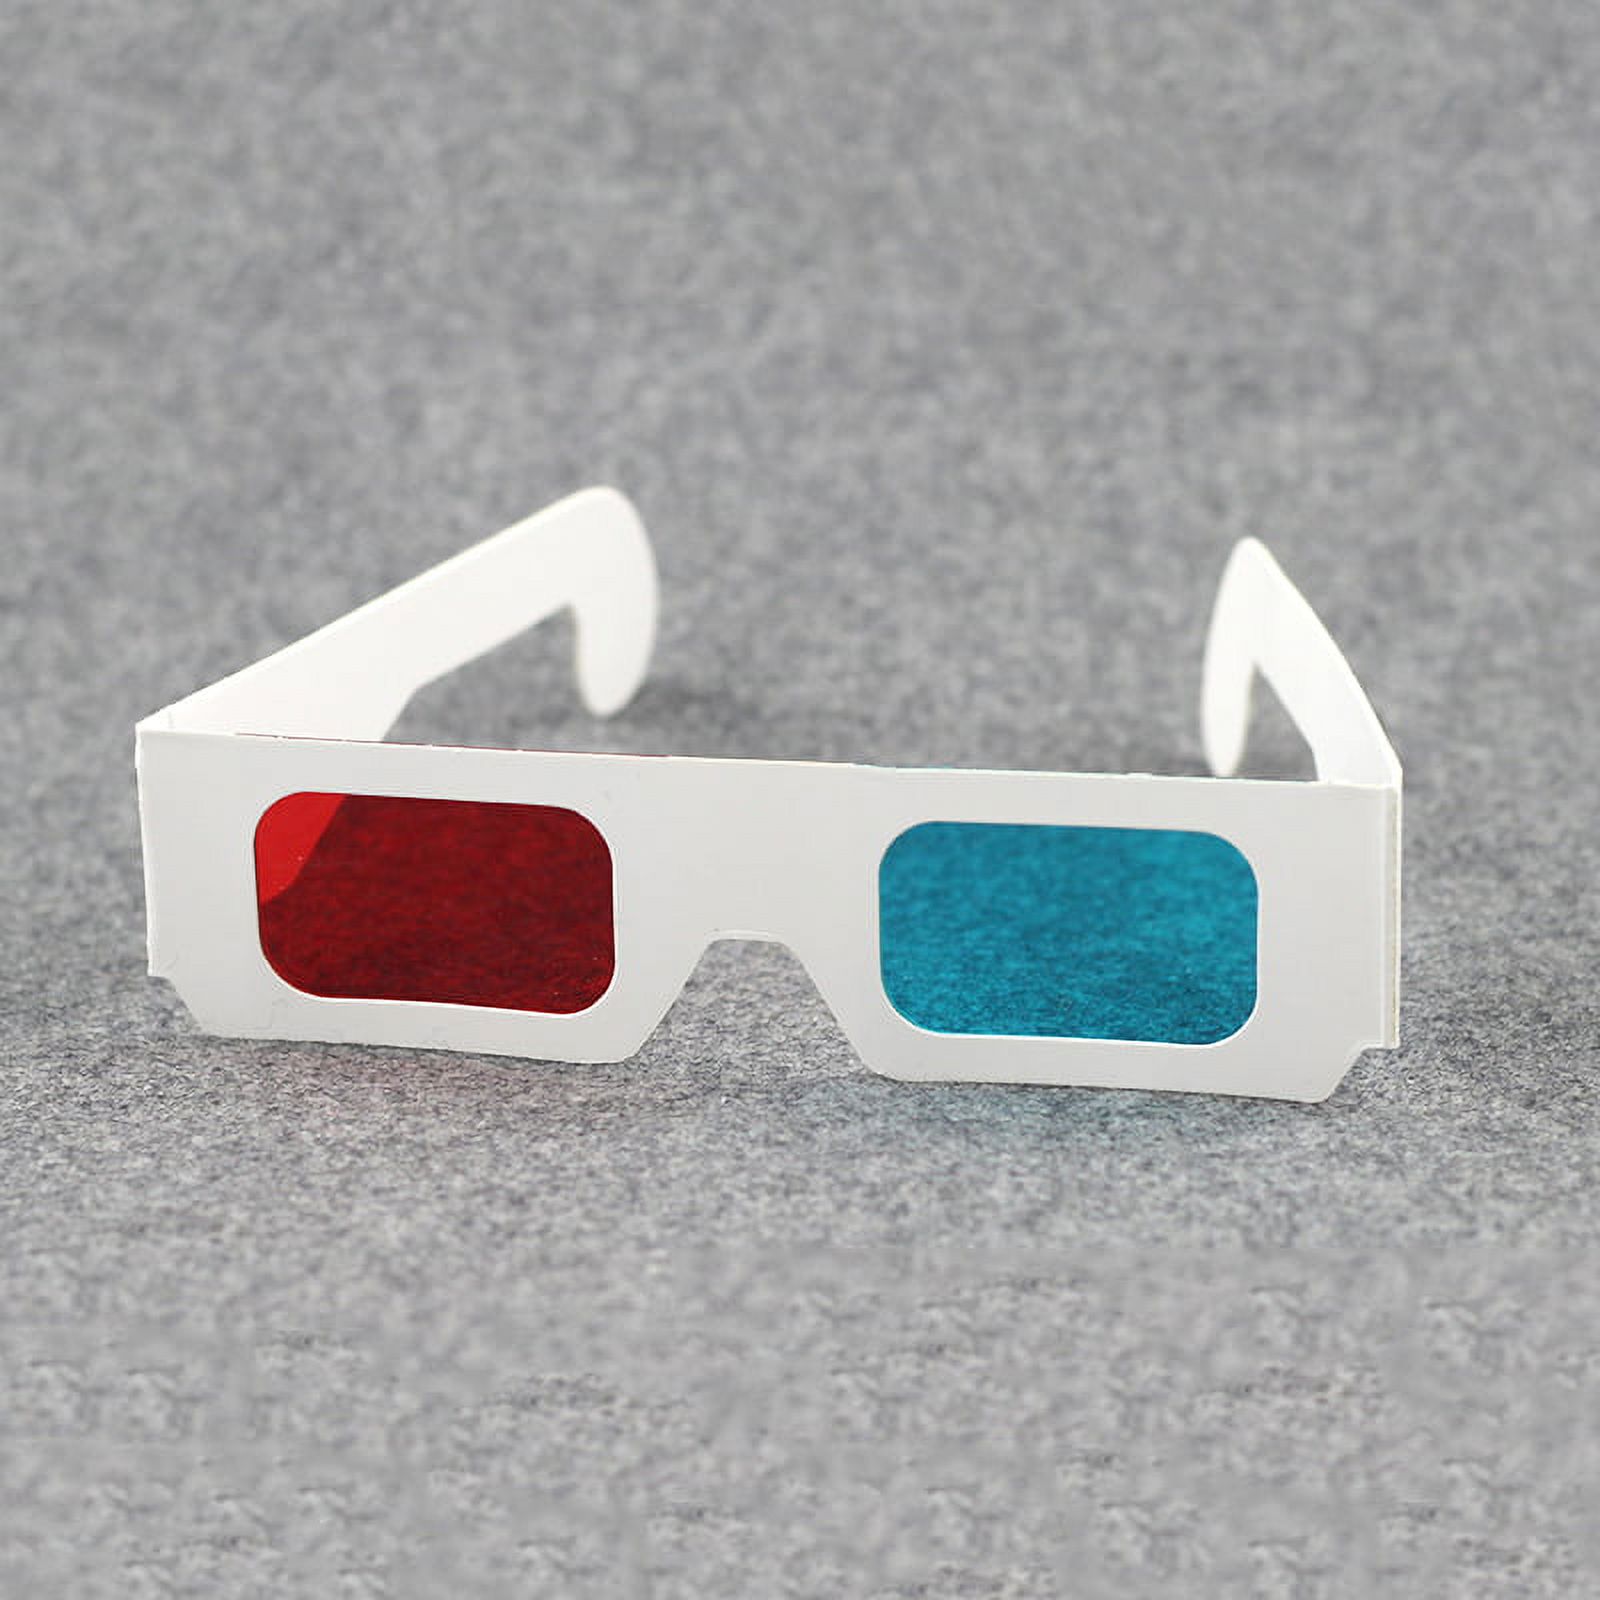 Universal Anaglyph Cardboard Paper Red Blue Cyan 3d Glasses Movie Glasses NEW - image 4 of 7